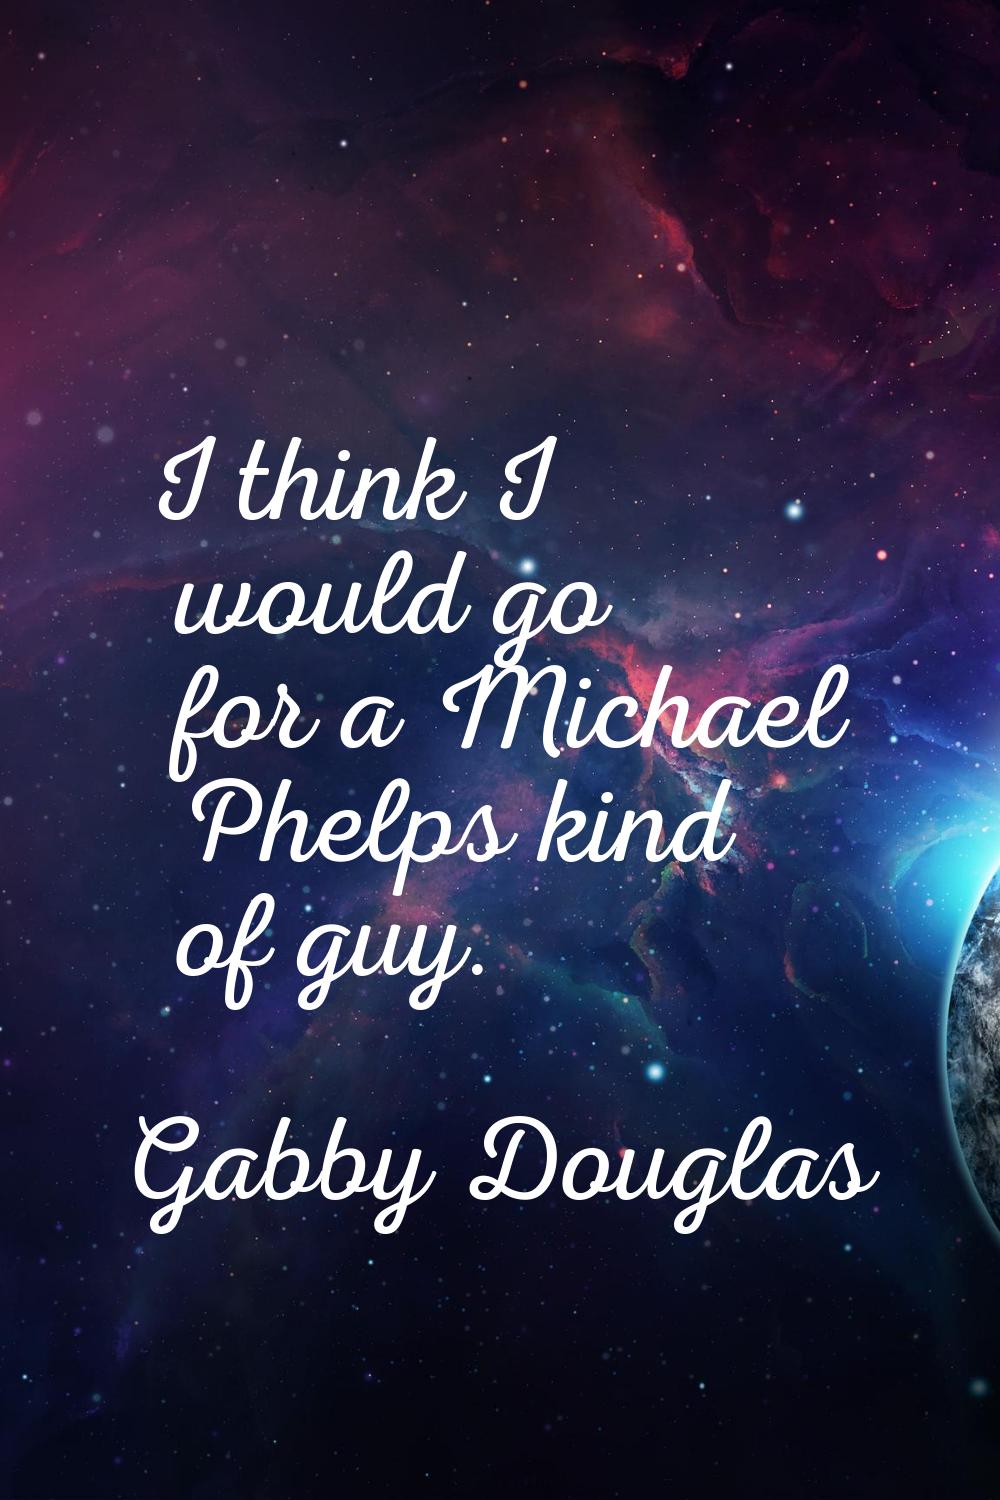 I think I would go for a Michael Phelps kind of guy.